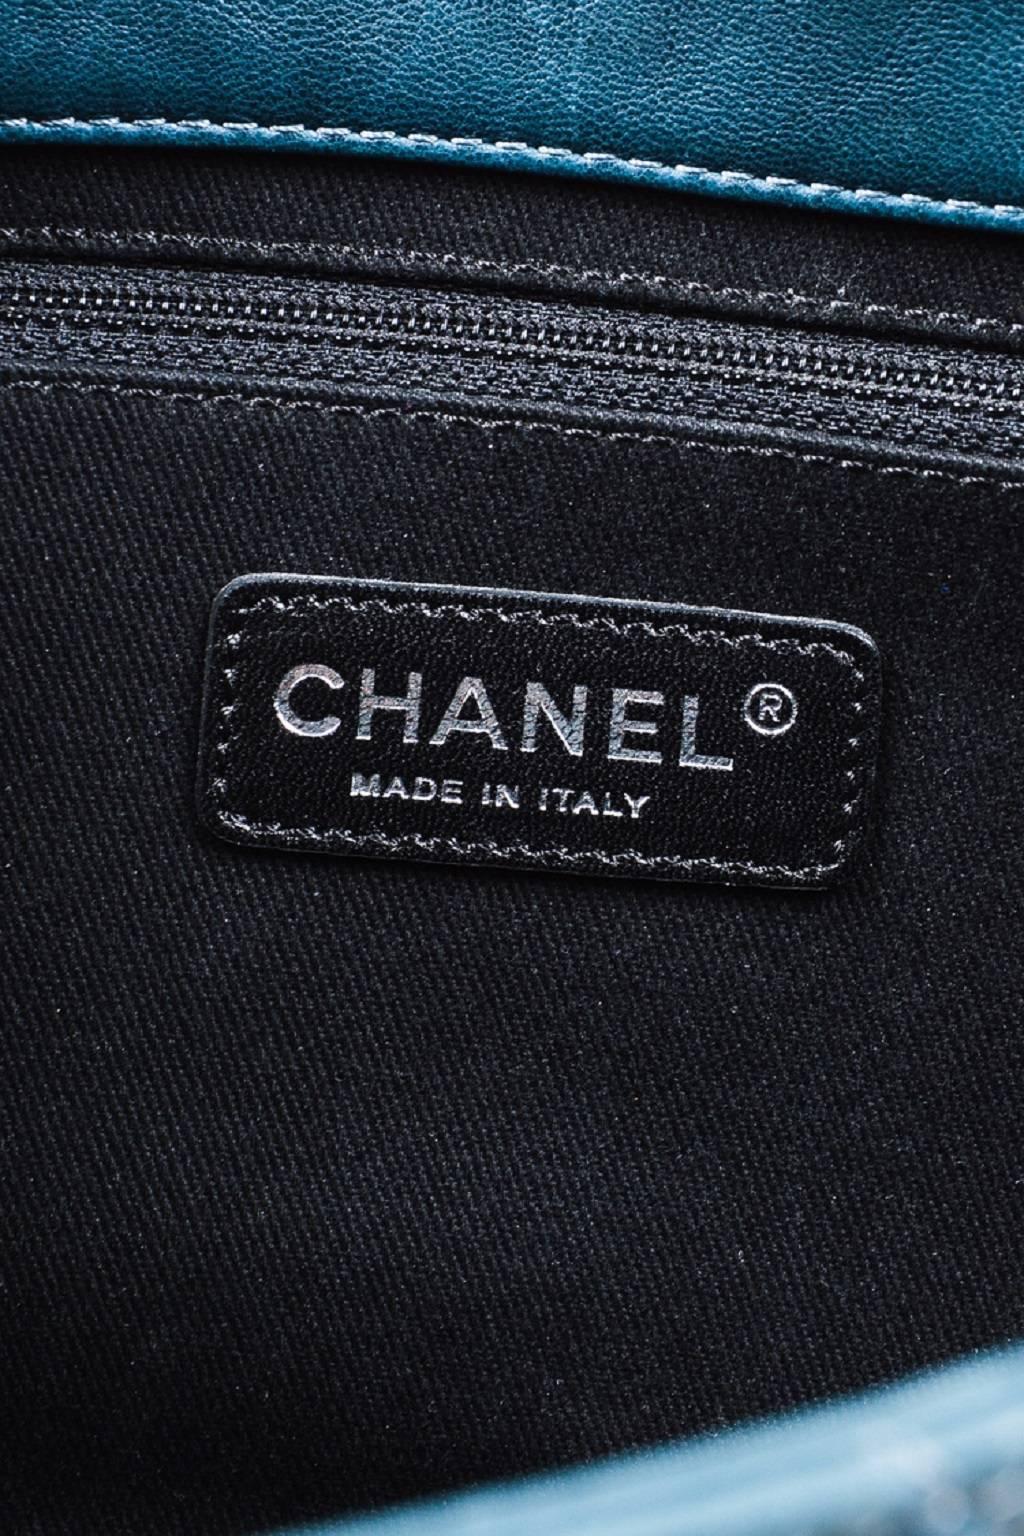 Chanel Teal Lambskin Leather Quilted Double Flap Maxi 